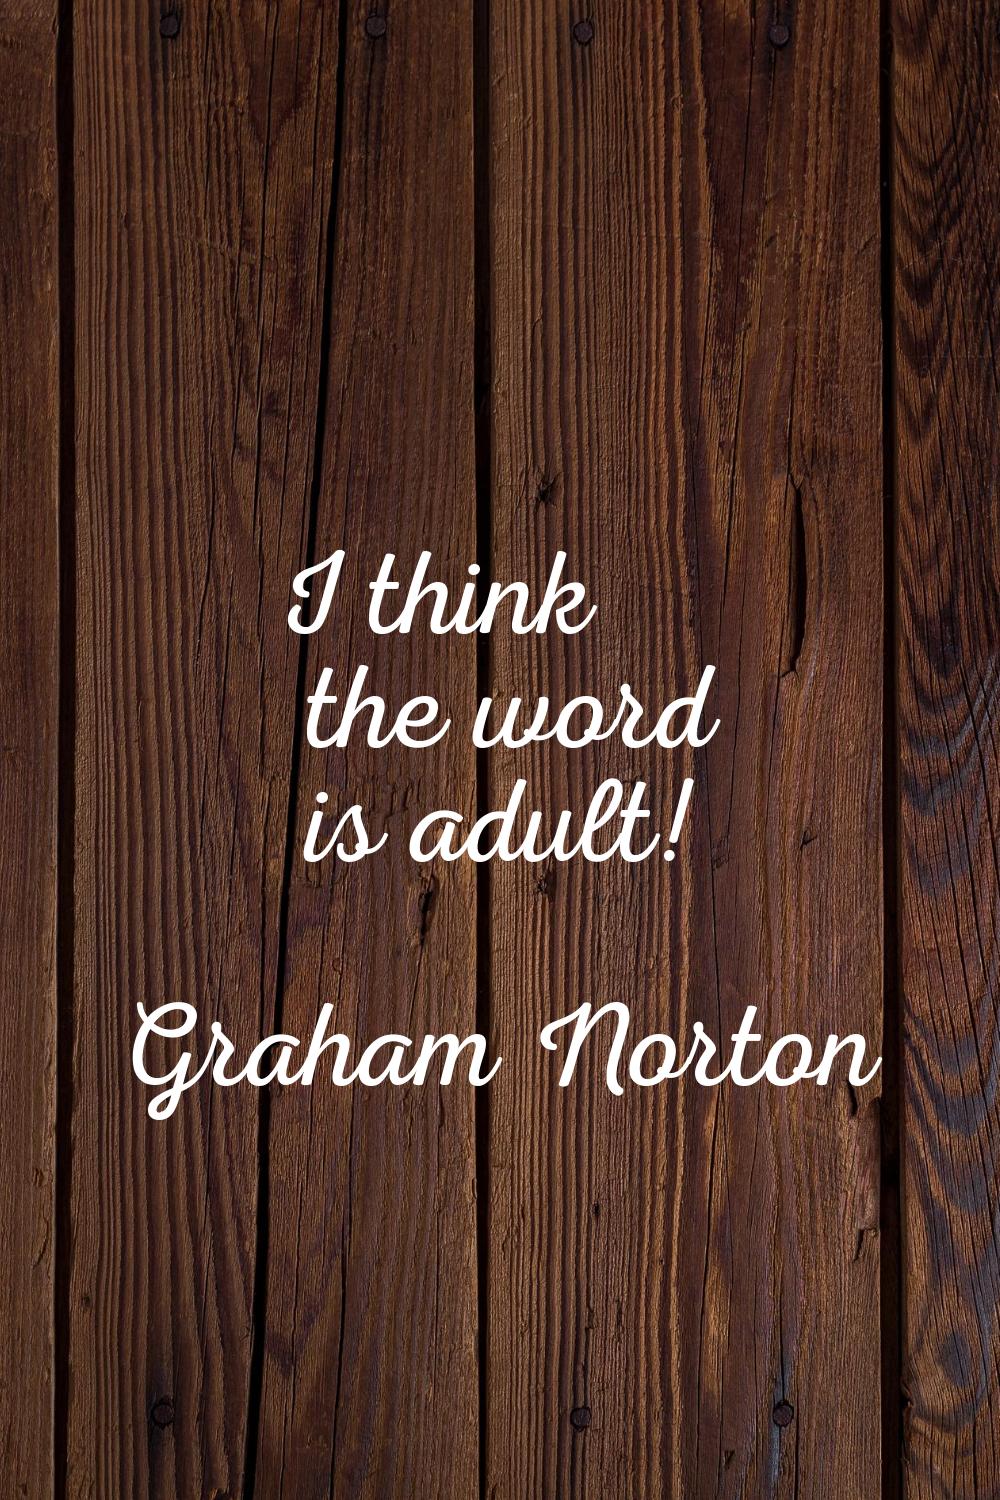 I think the word is adult!